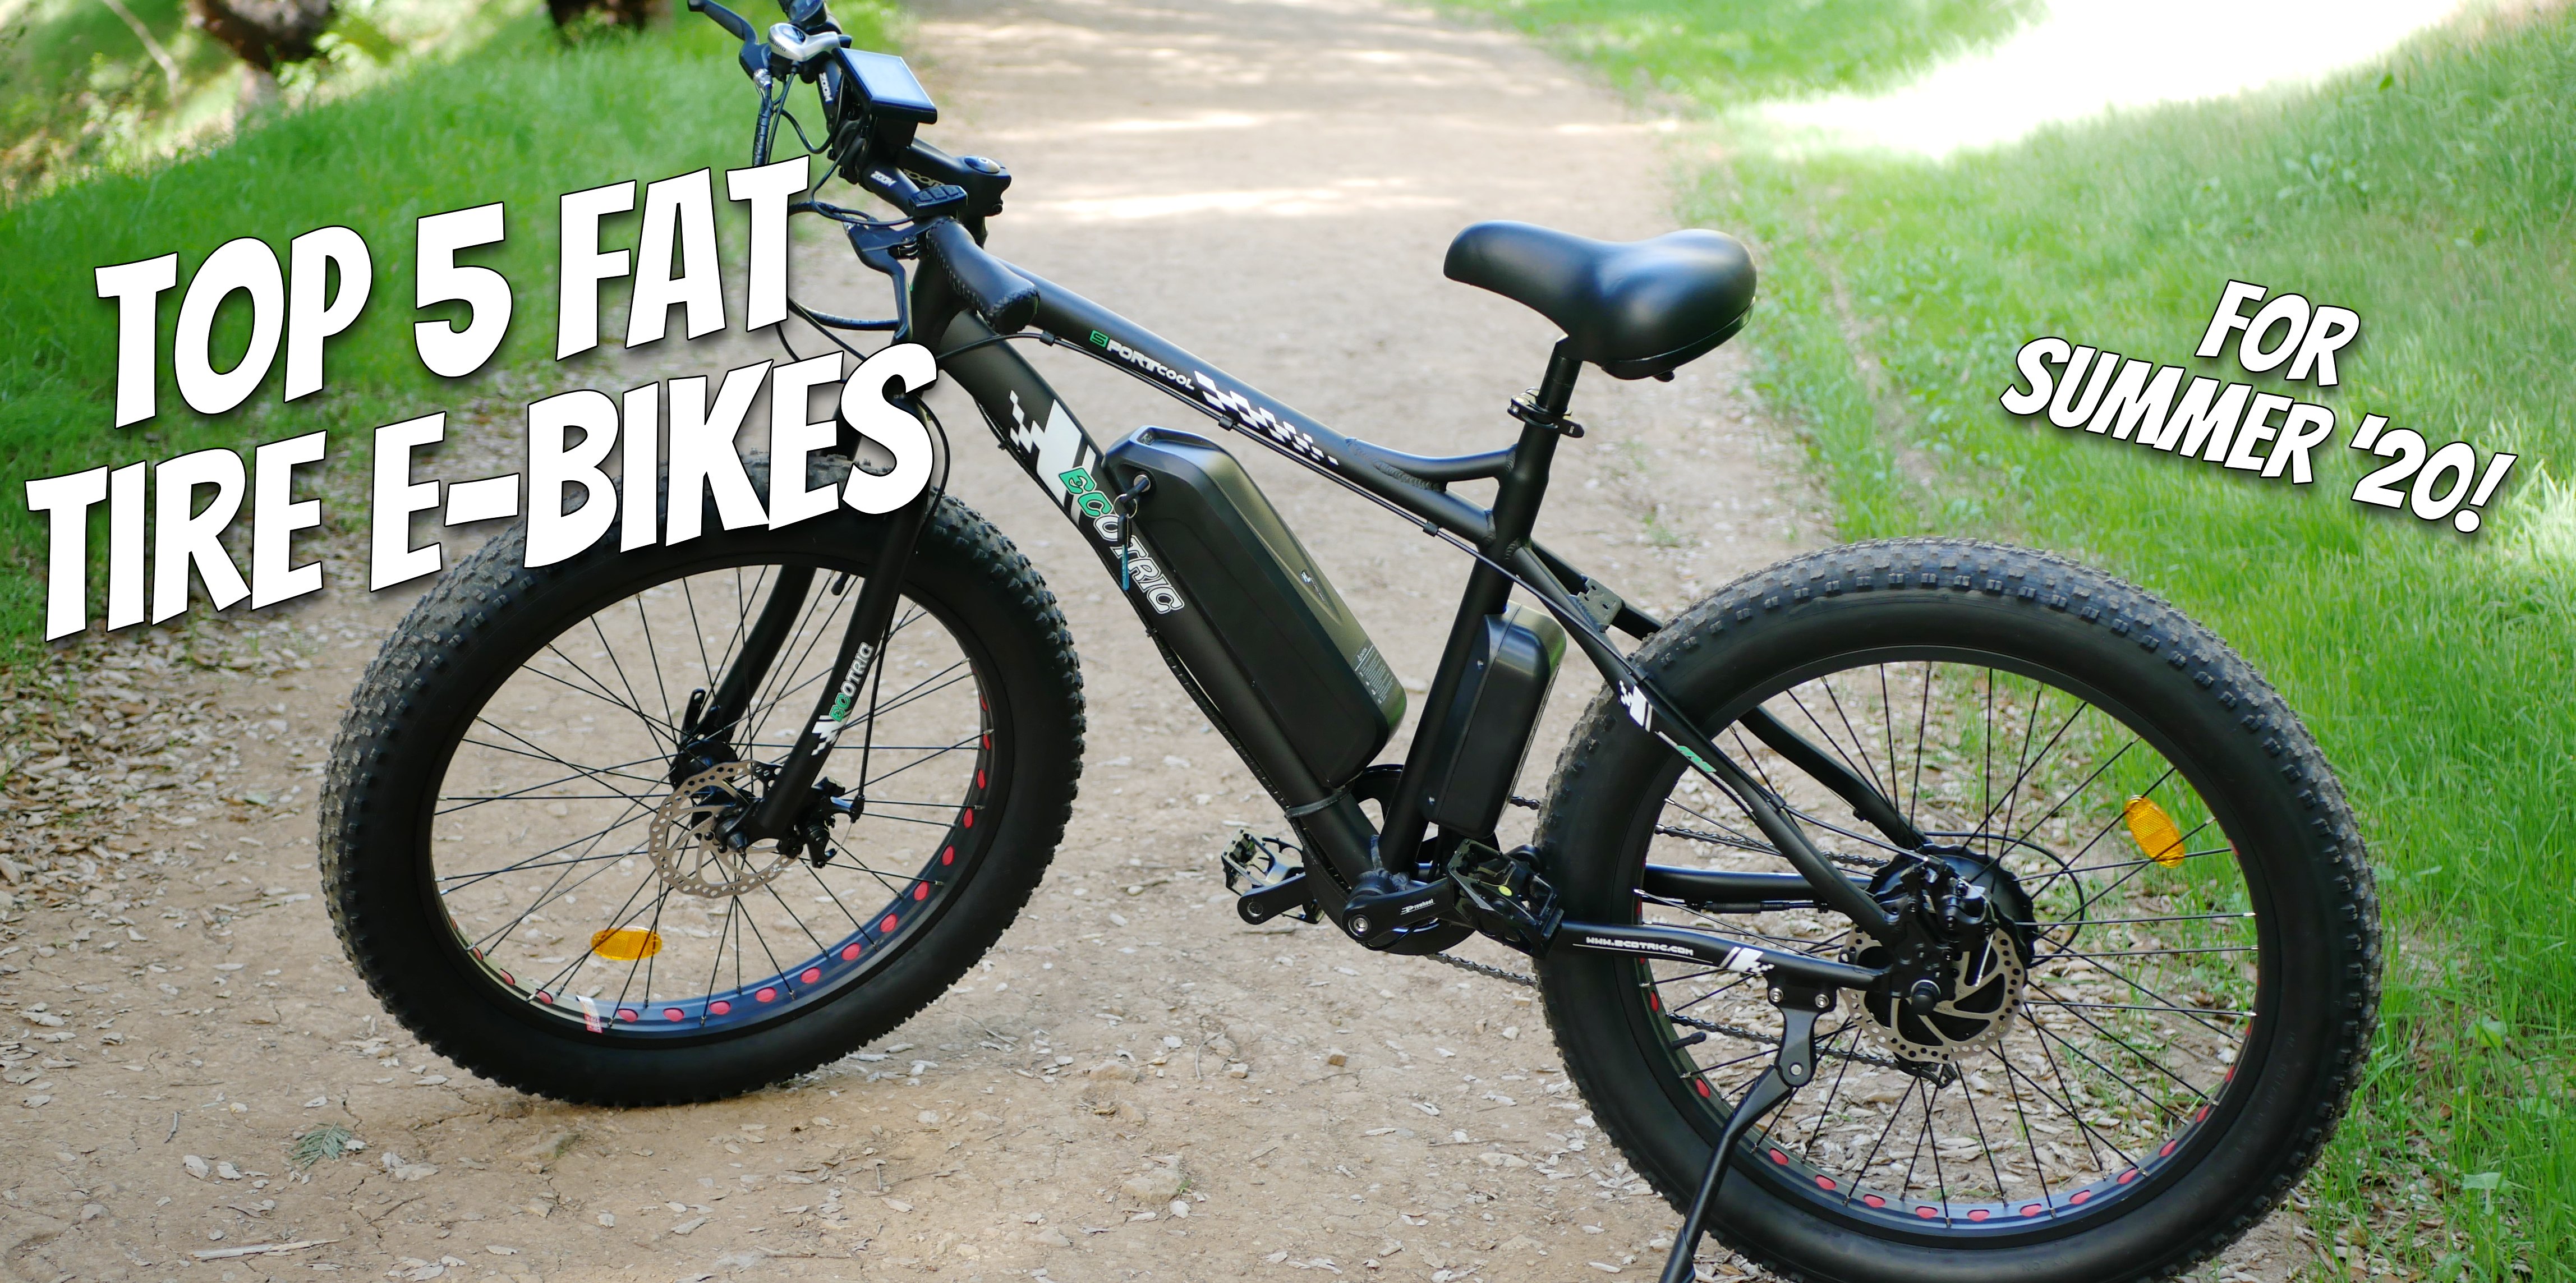 Top 5 fat tire electric bikes we've tested (and you'll want!) for ... - Fat Tire Ebike Top 5 HeaDer 1